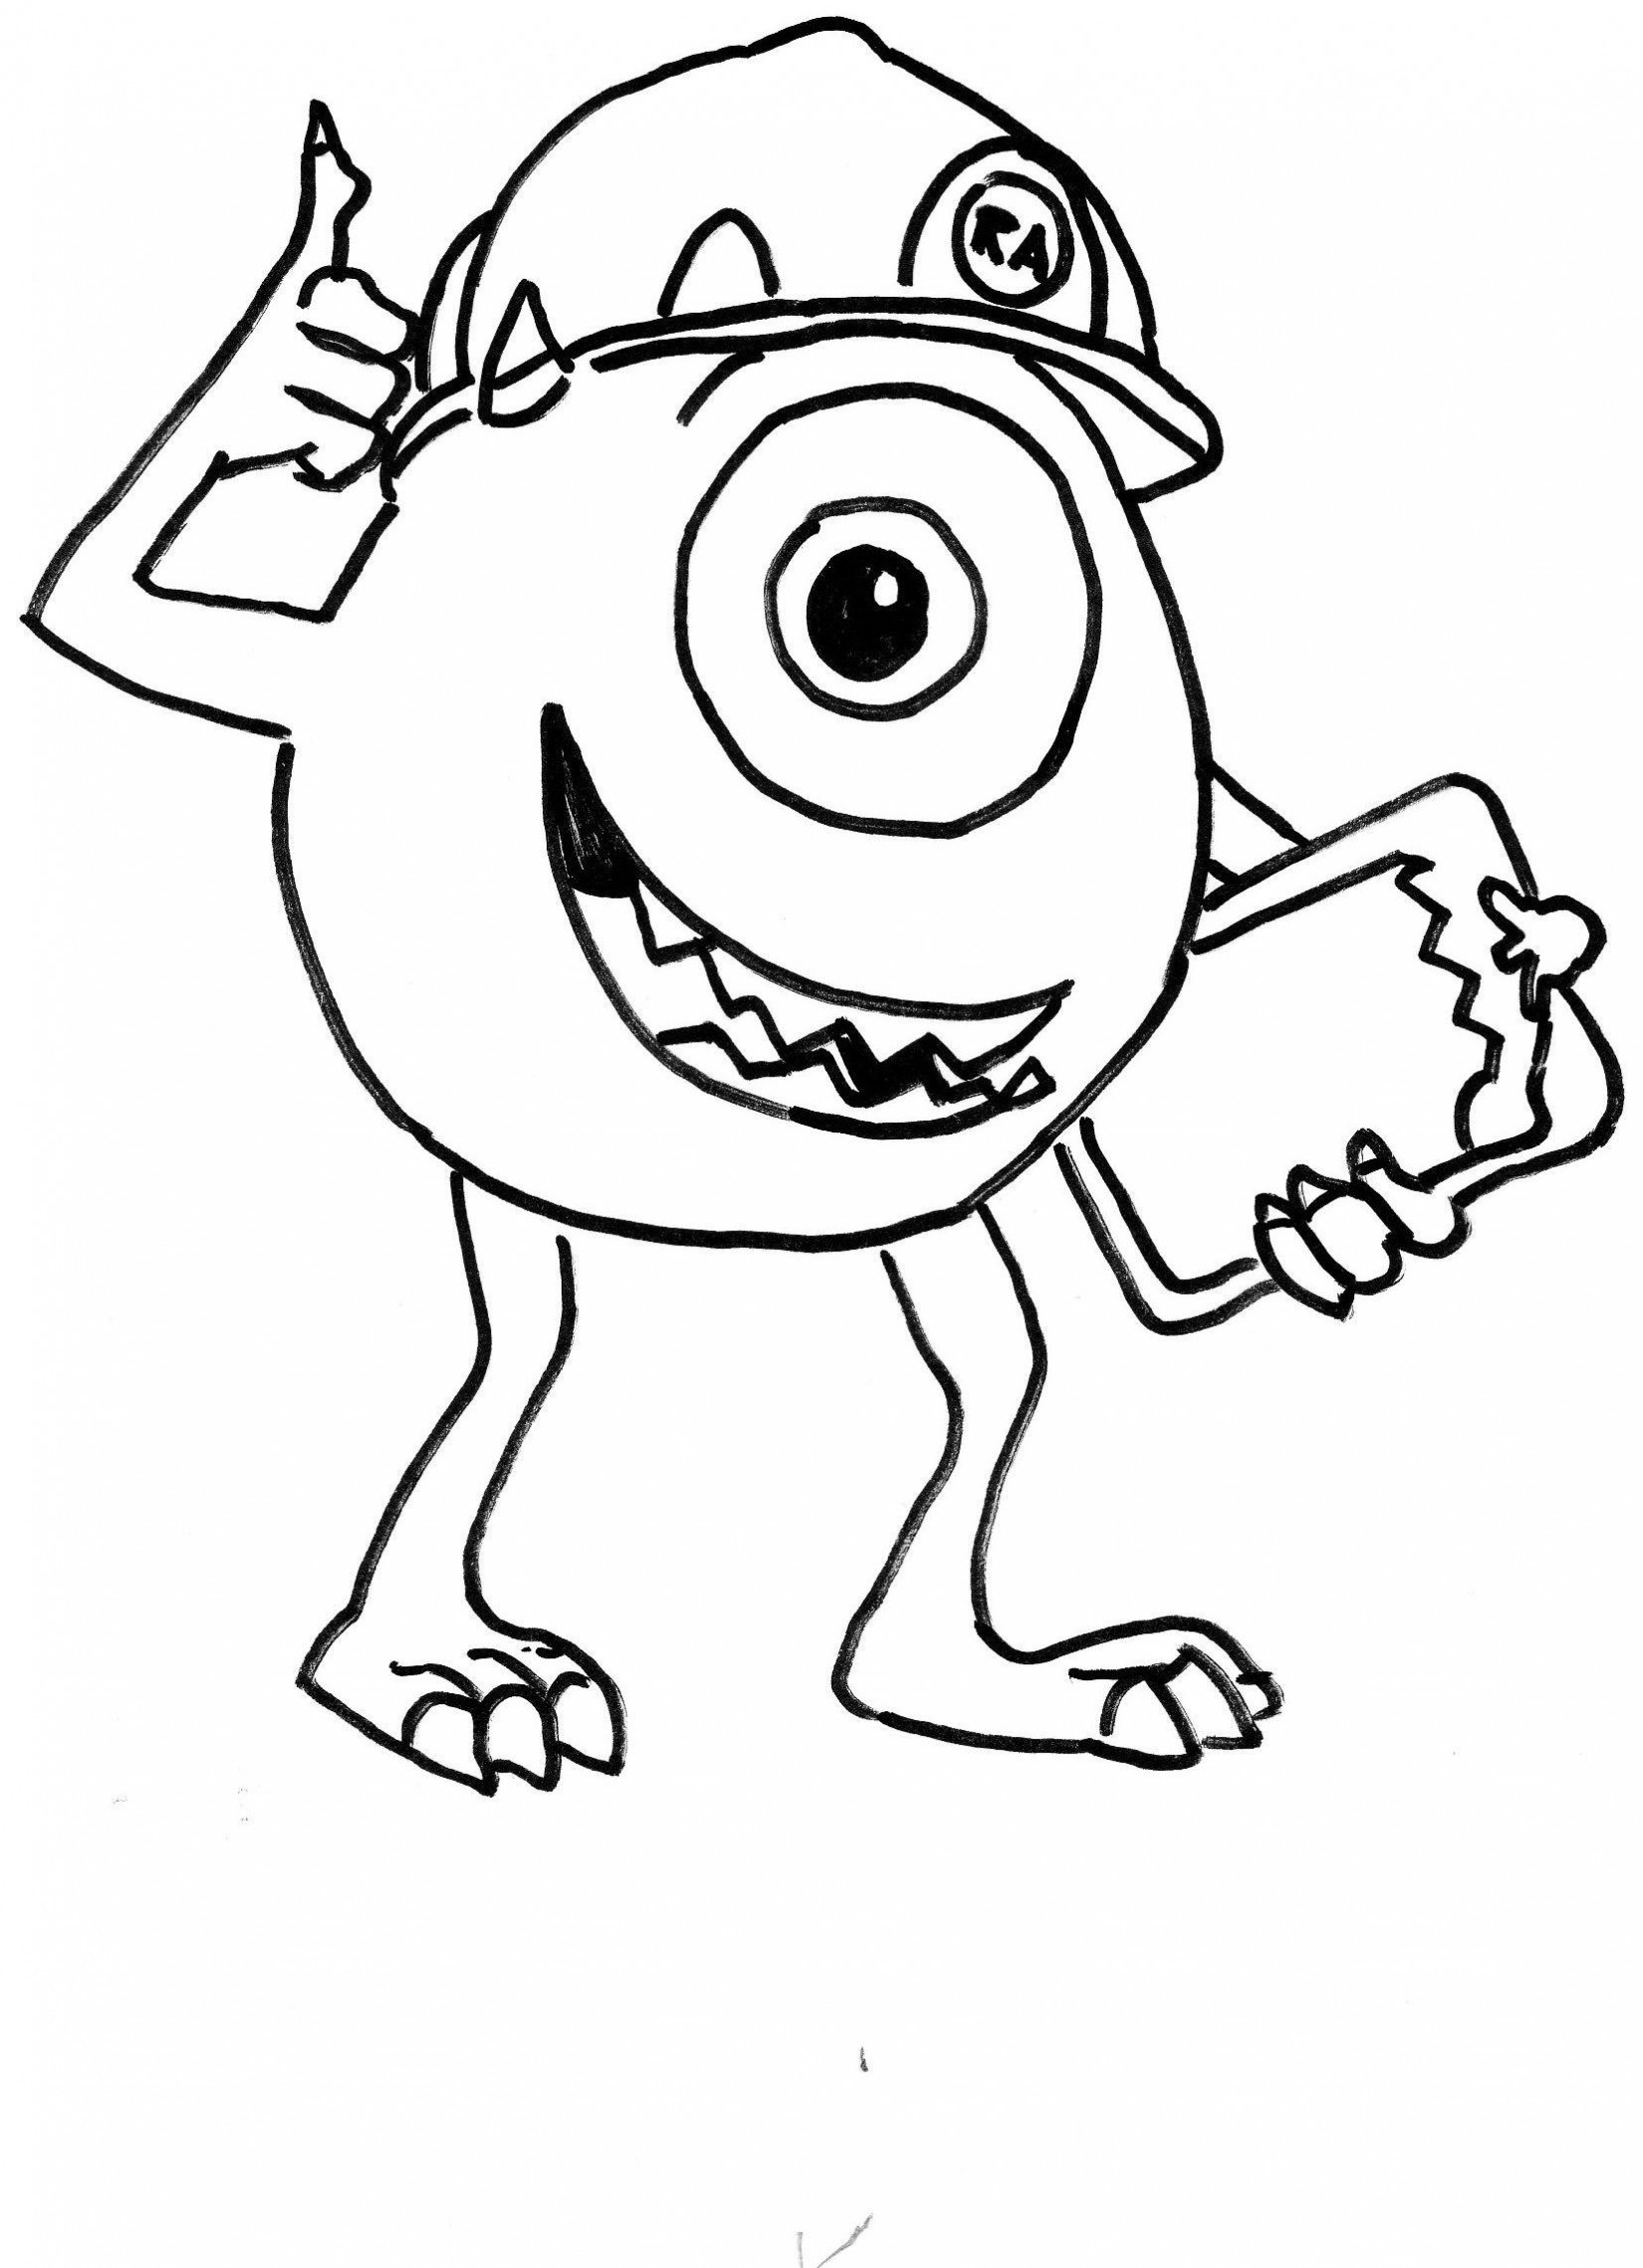 Coloring-Pages-Kids
 coloring pages for kids Free